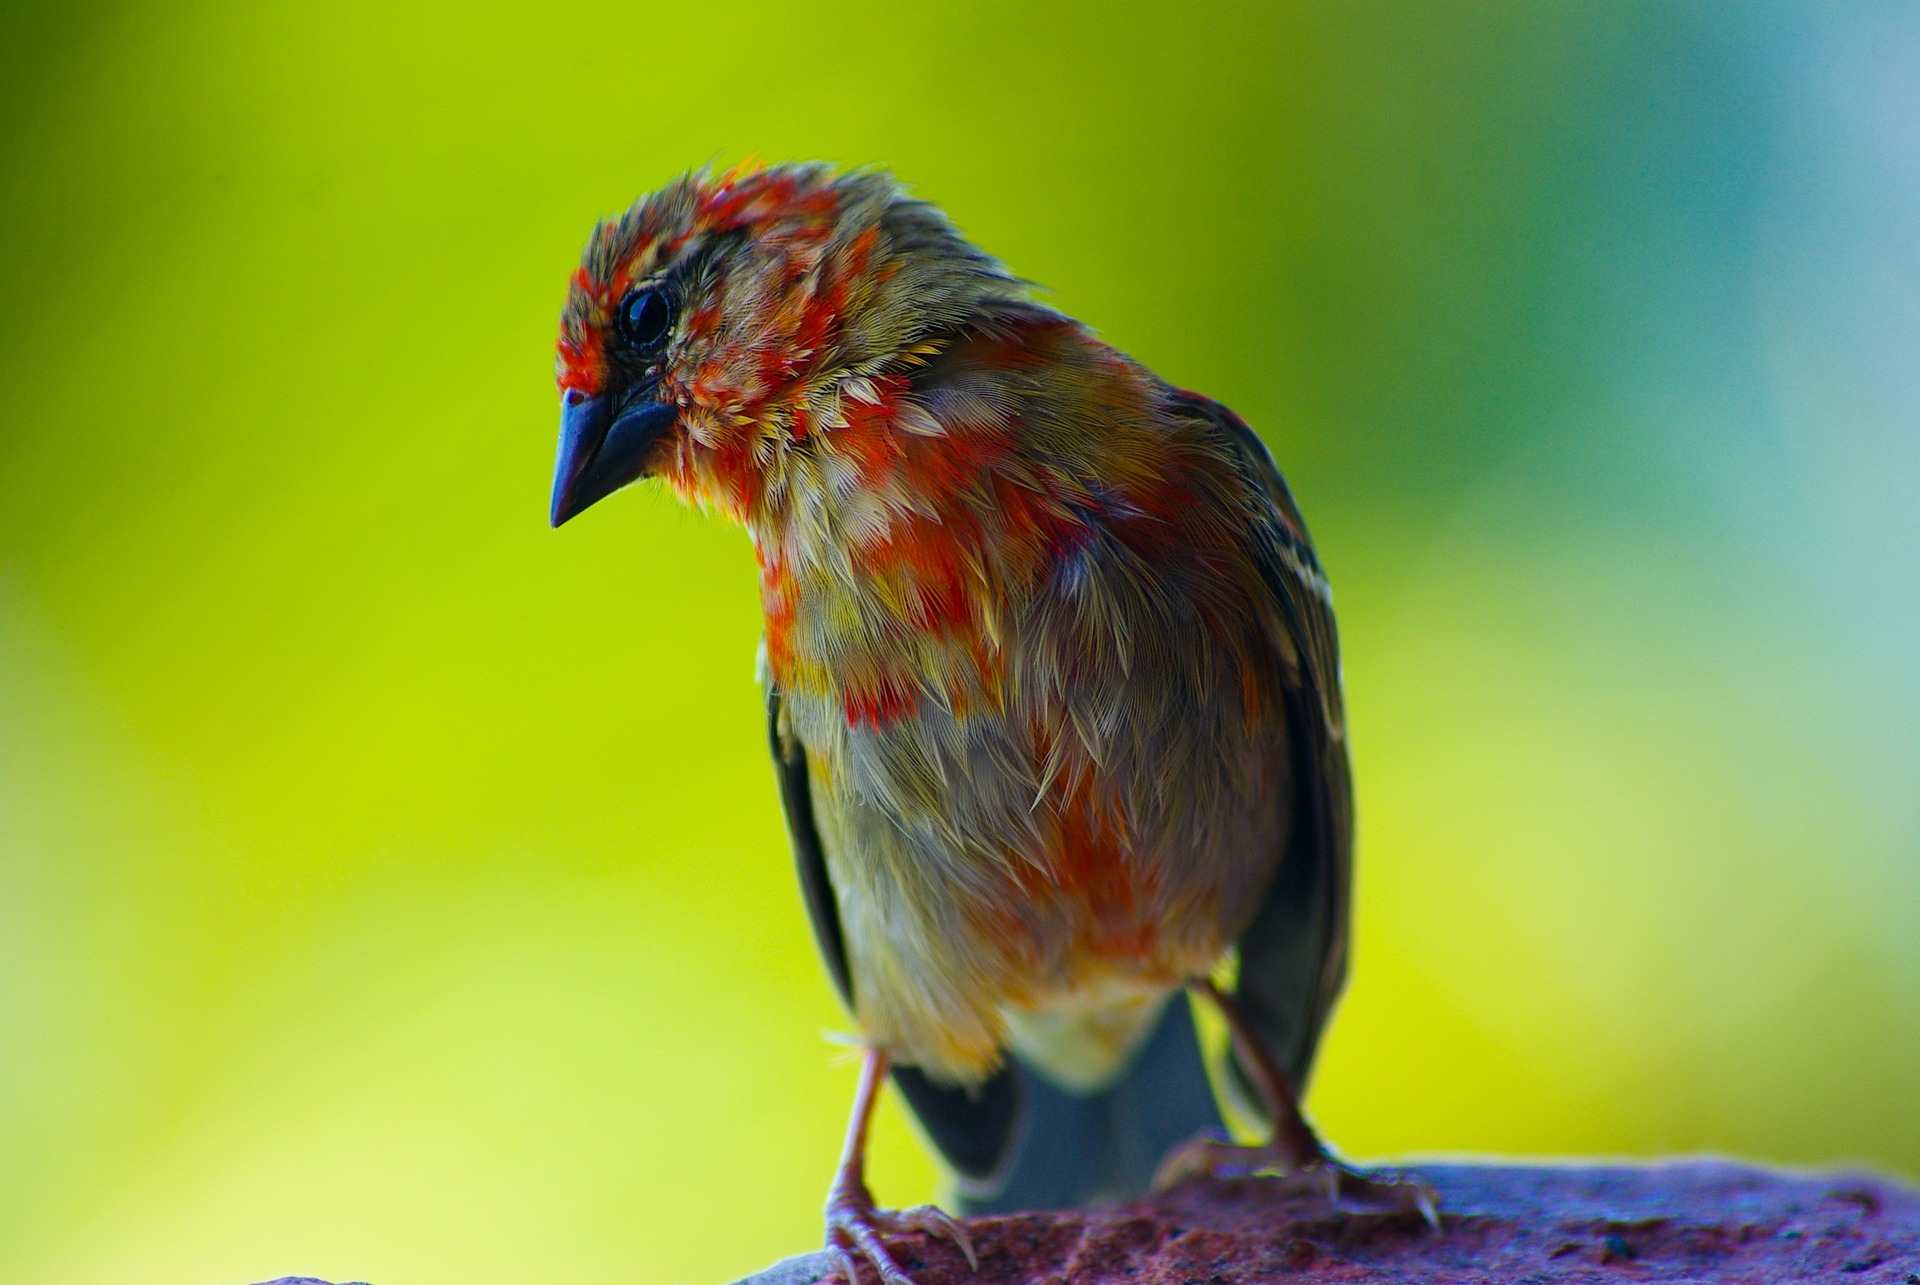 A brown and red bird perches on a surface in the seashells